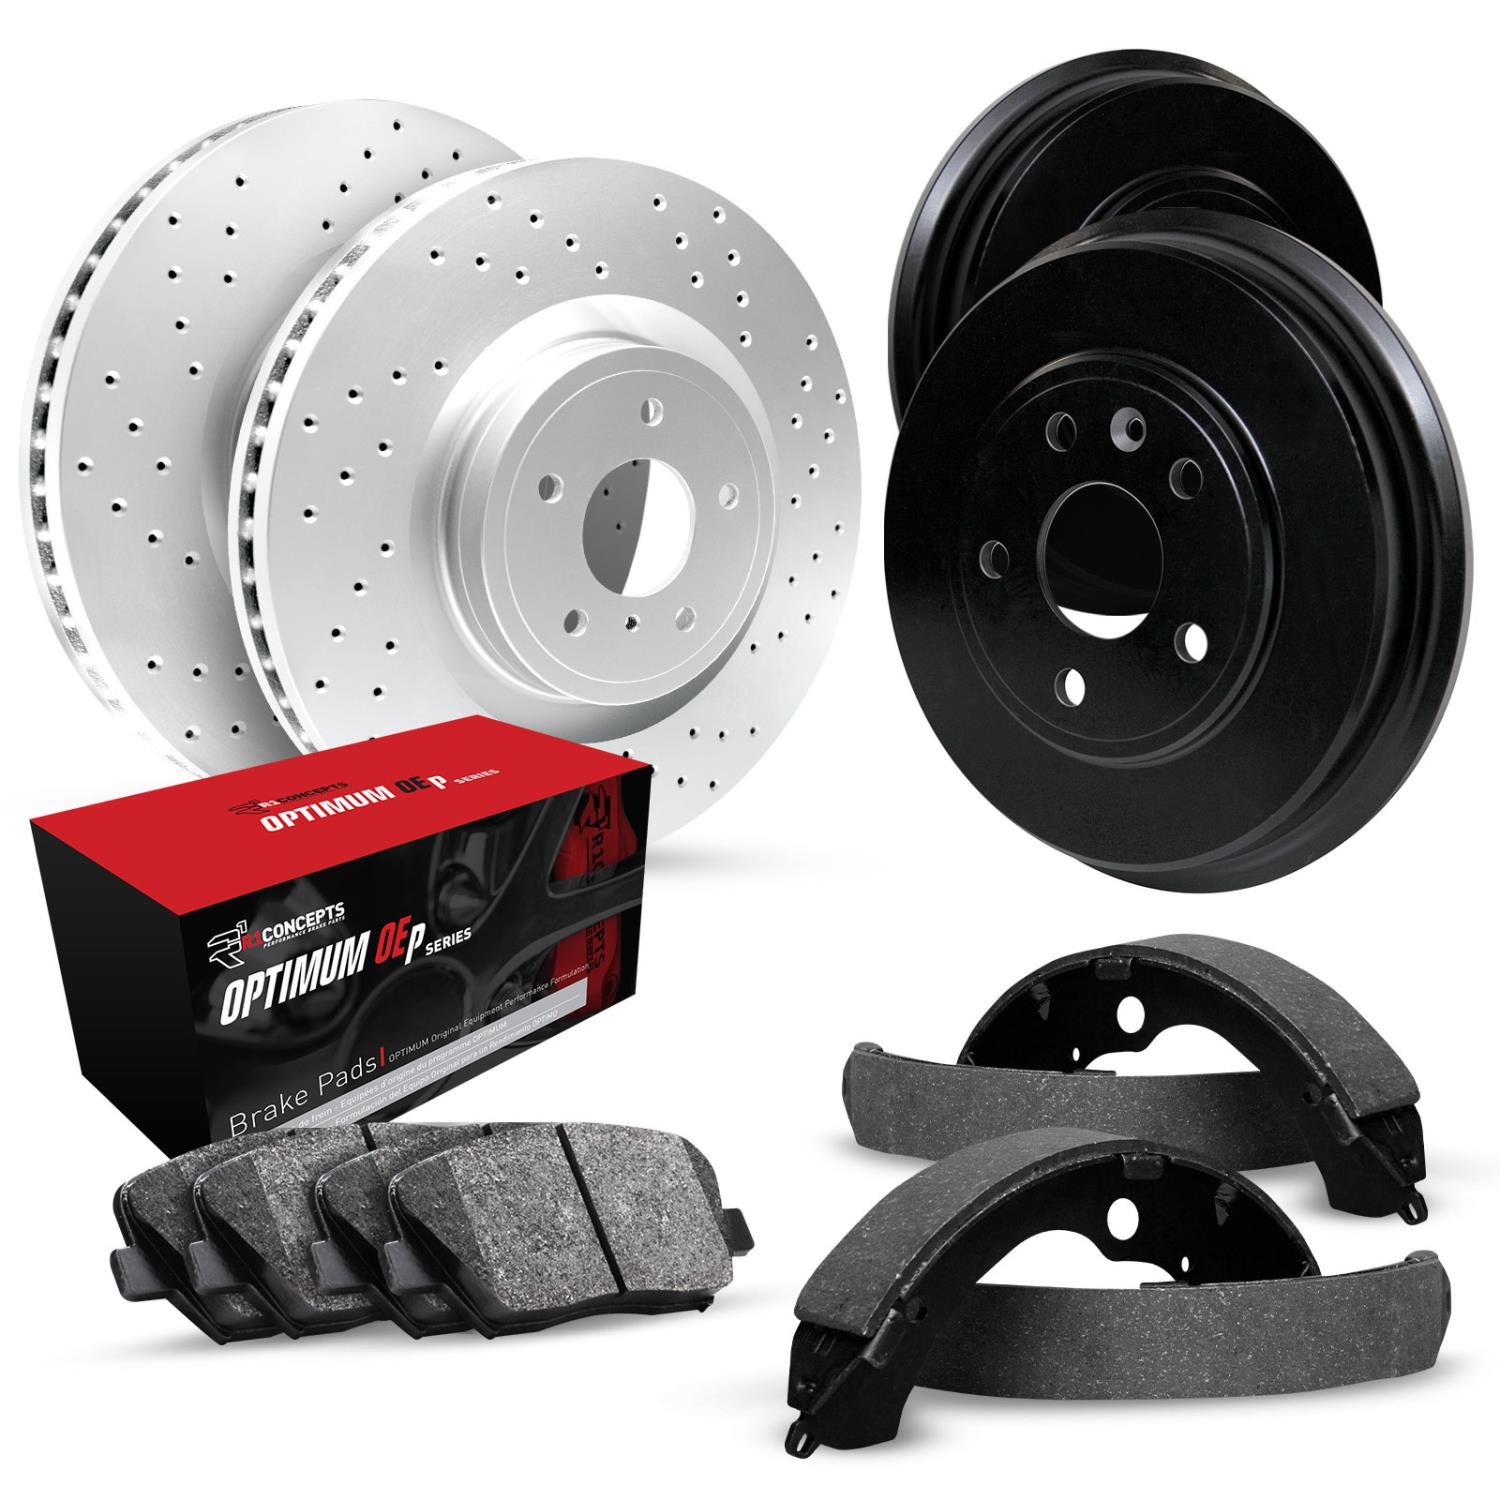 GEO-Carbon Drilled Brake Rotor & Drum Set w/Optimum OE Pads & Shoes, 1984-1992 GM, Position: Front & Rear